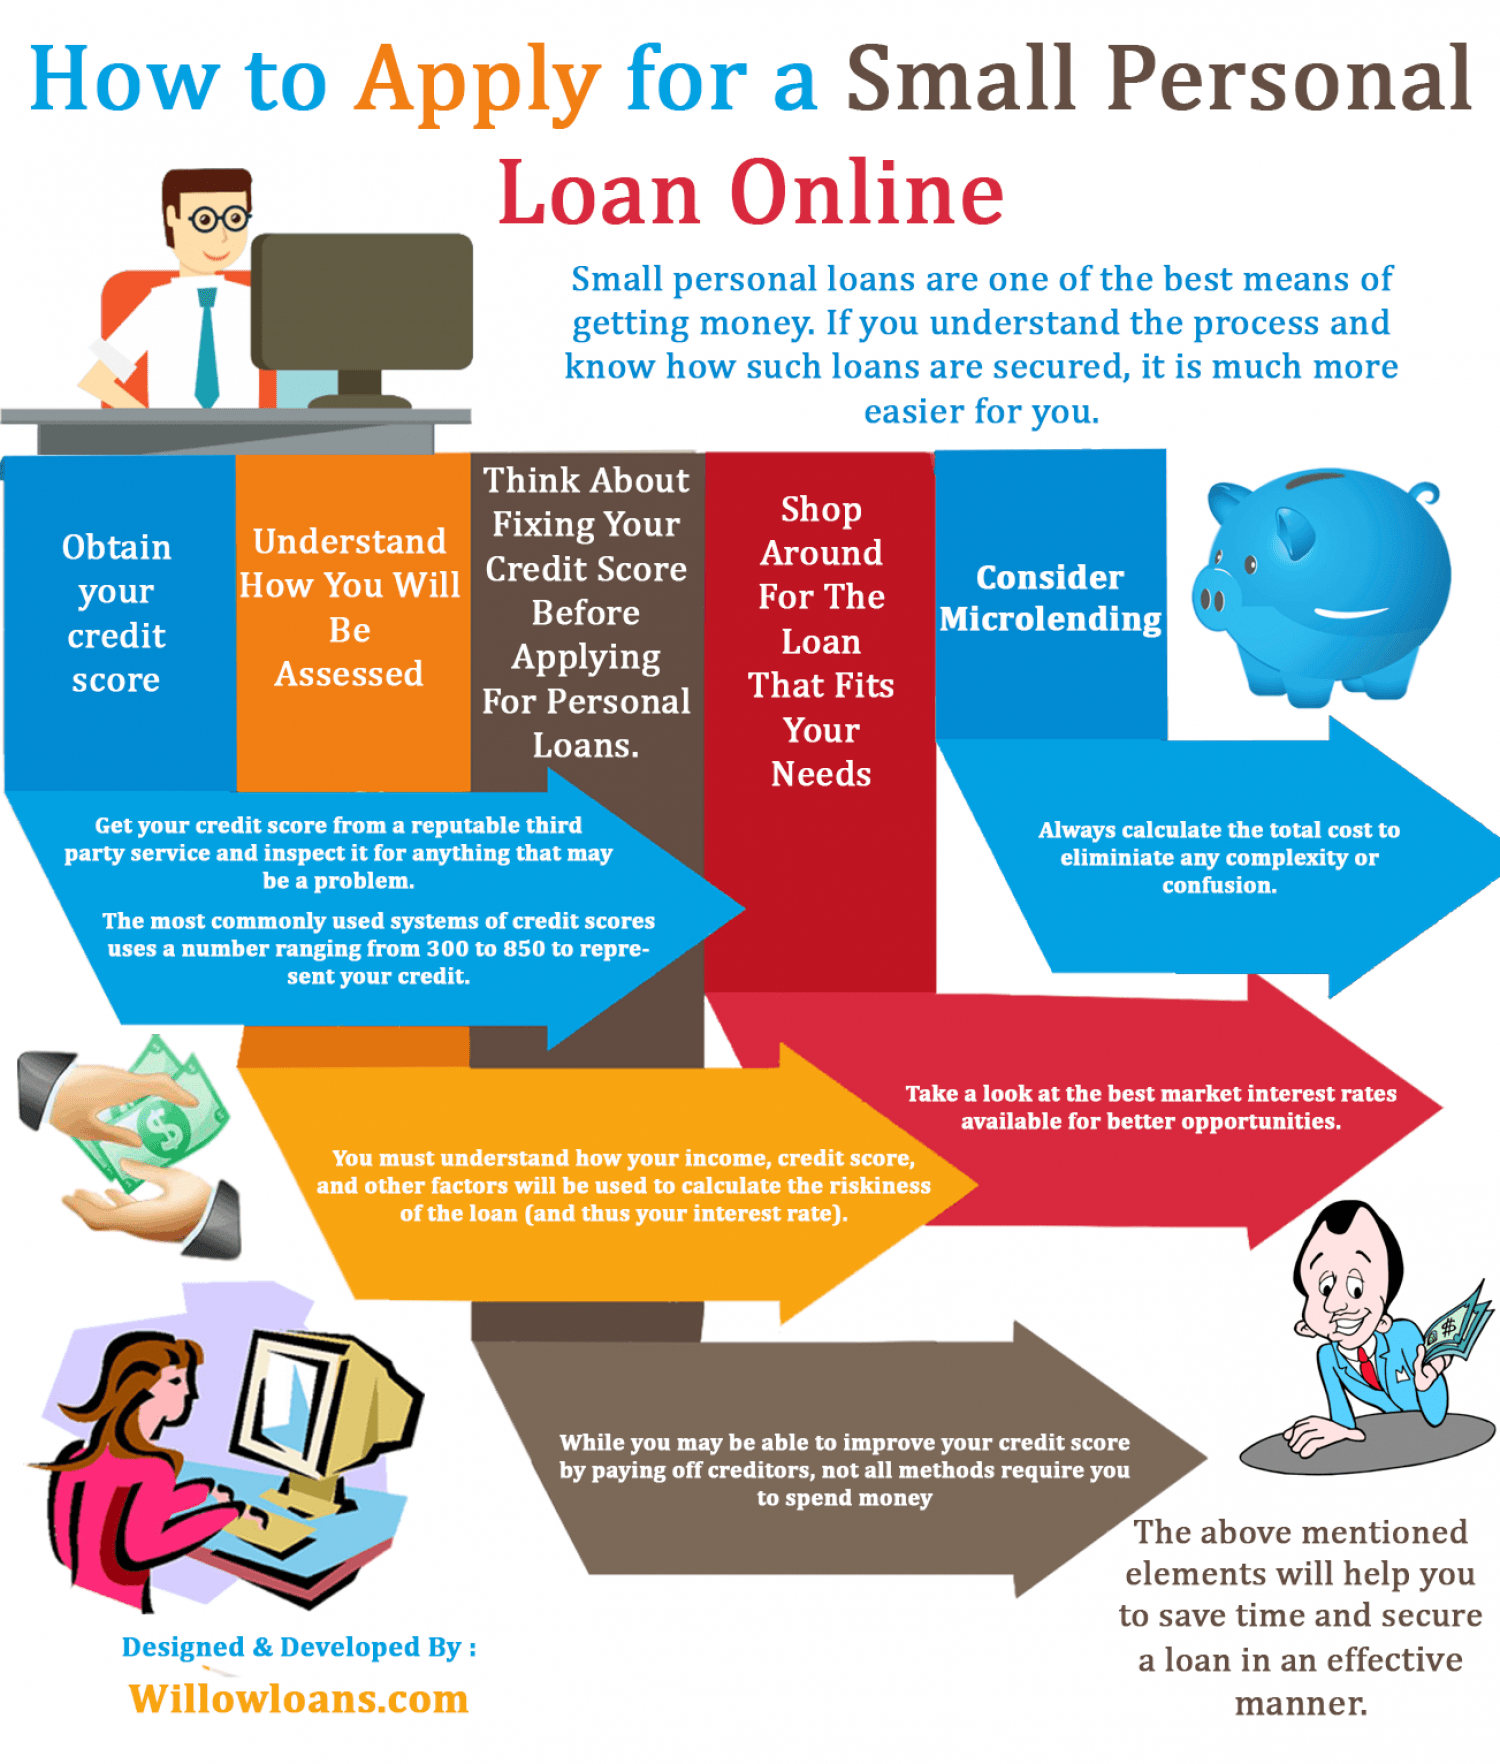 How to apply for a small personal loan online. Get your personal loans same day